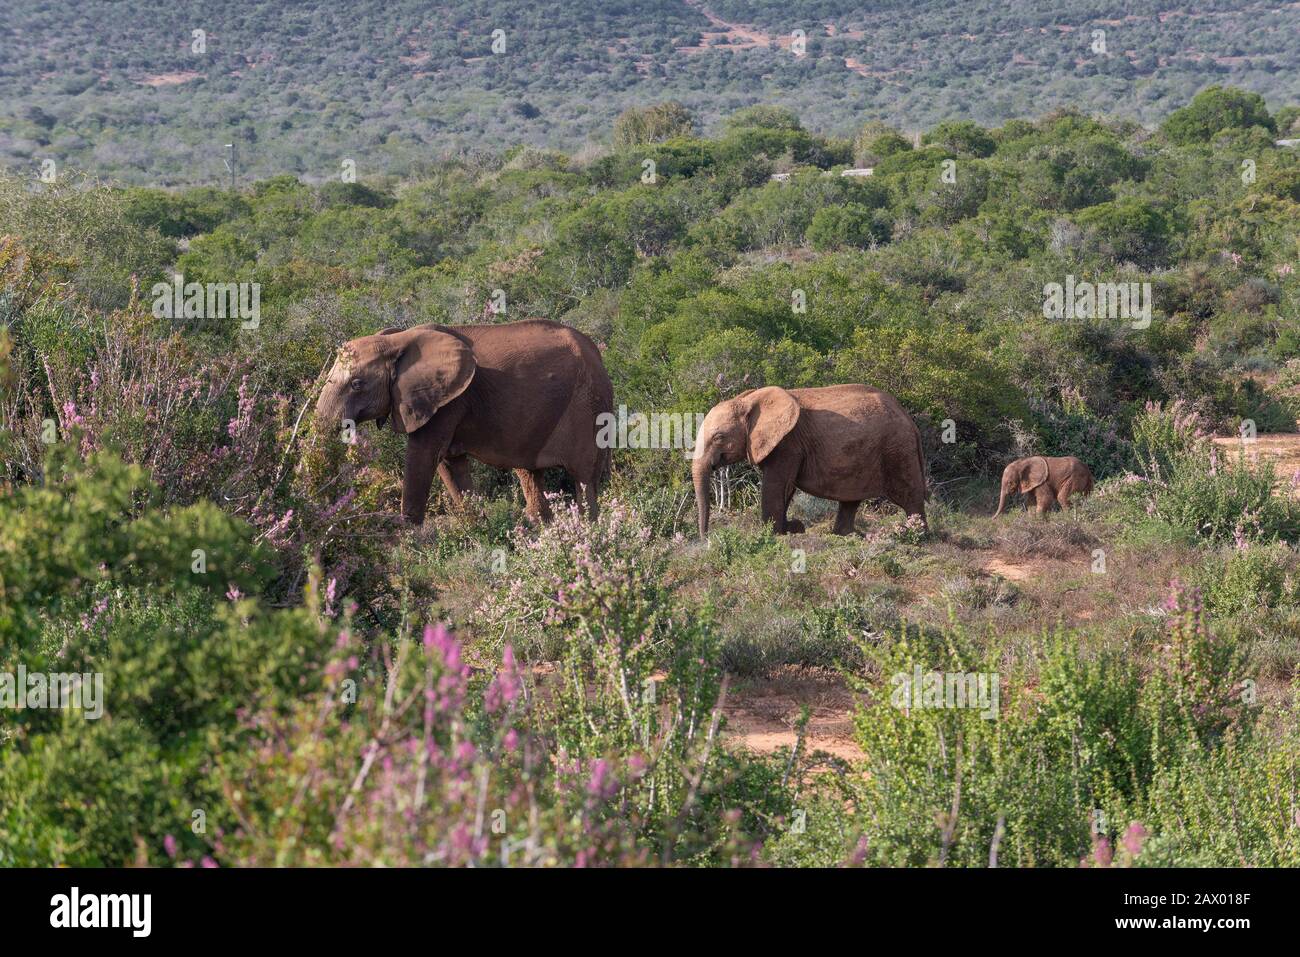 African elephant mother and young graze on lush vegetation in the Addo Elephant National Park, Eastern Cape, South Africa Stock Photo